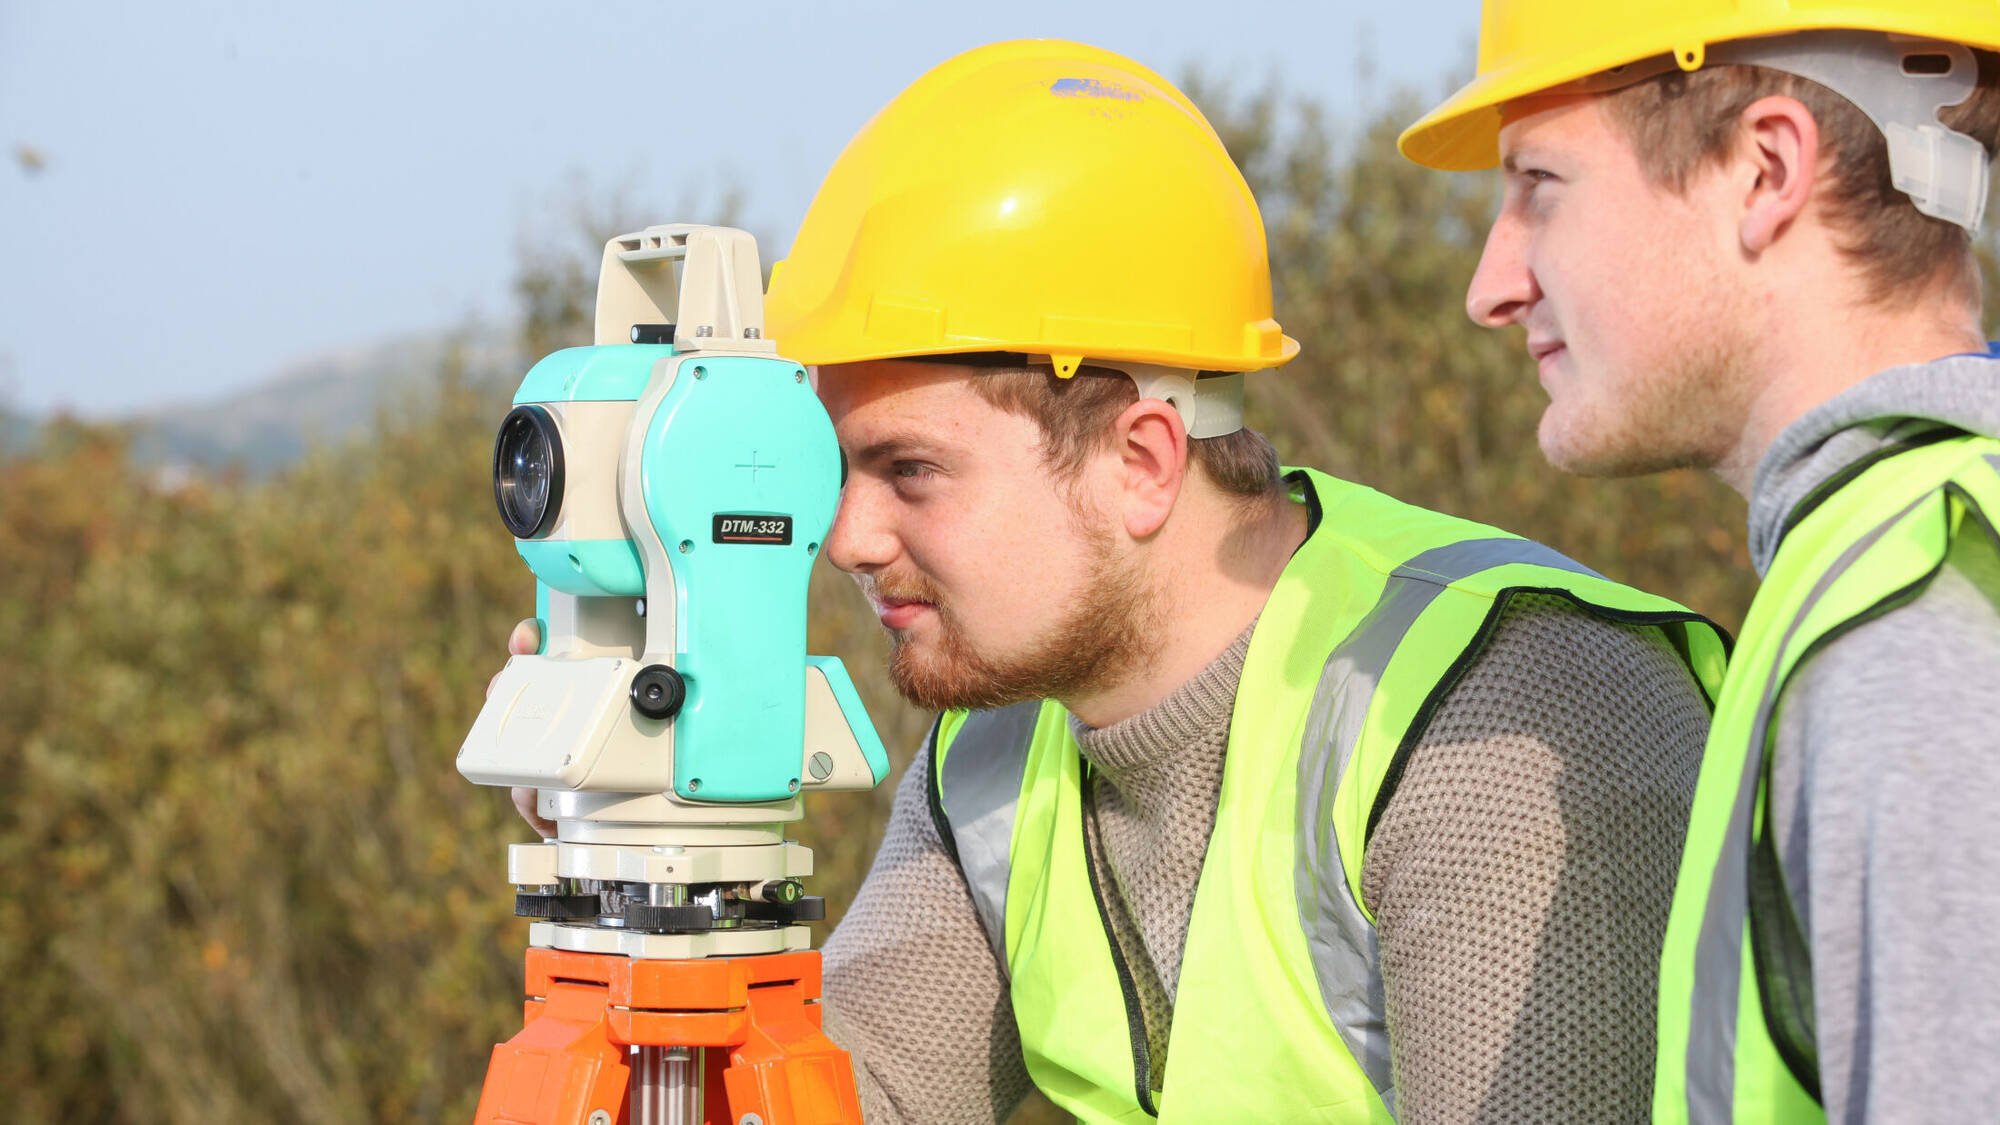 Students looking through a total station